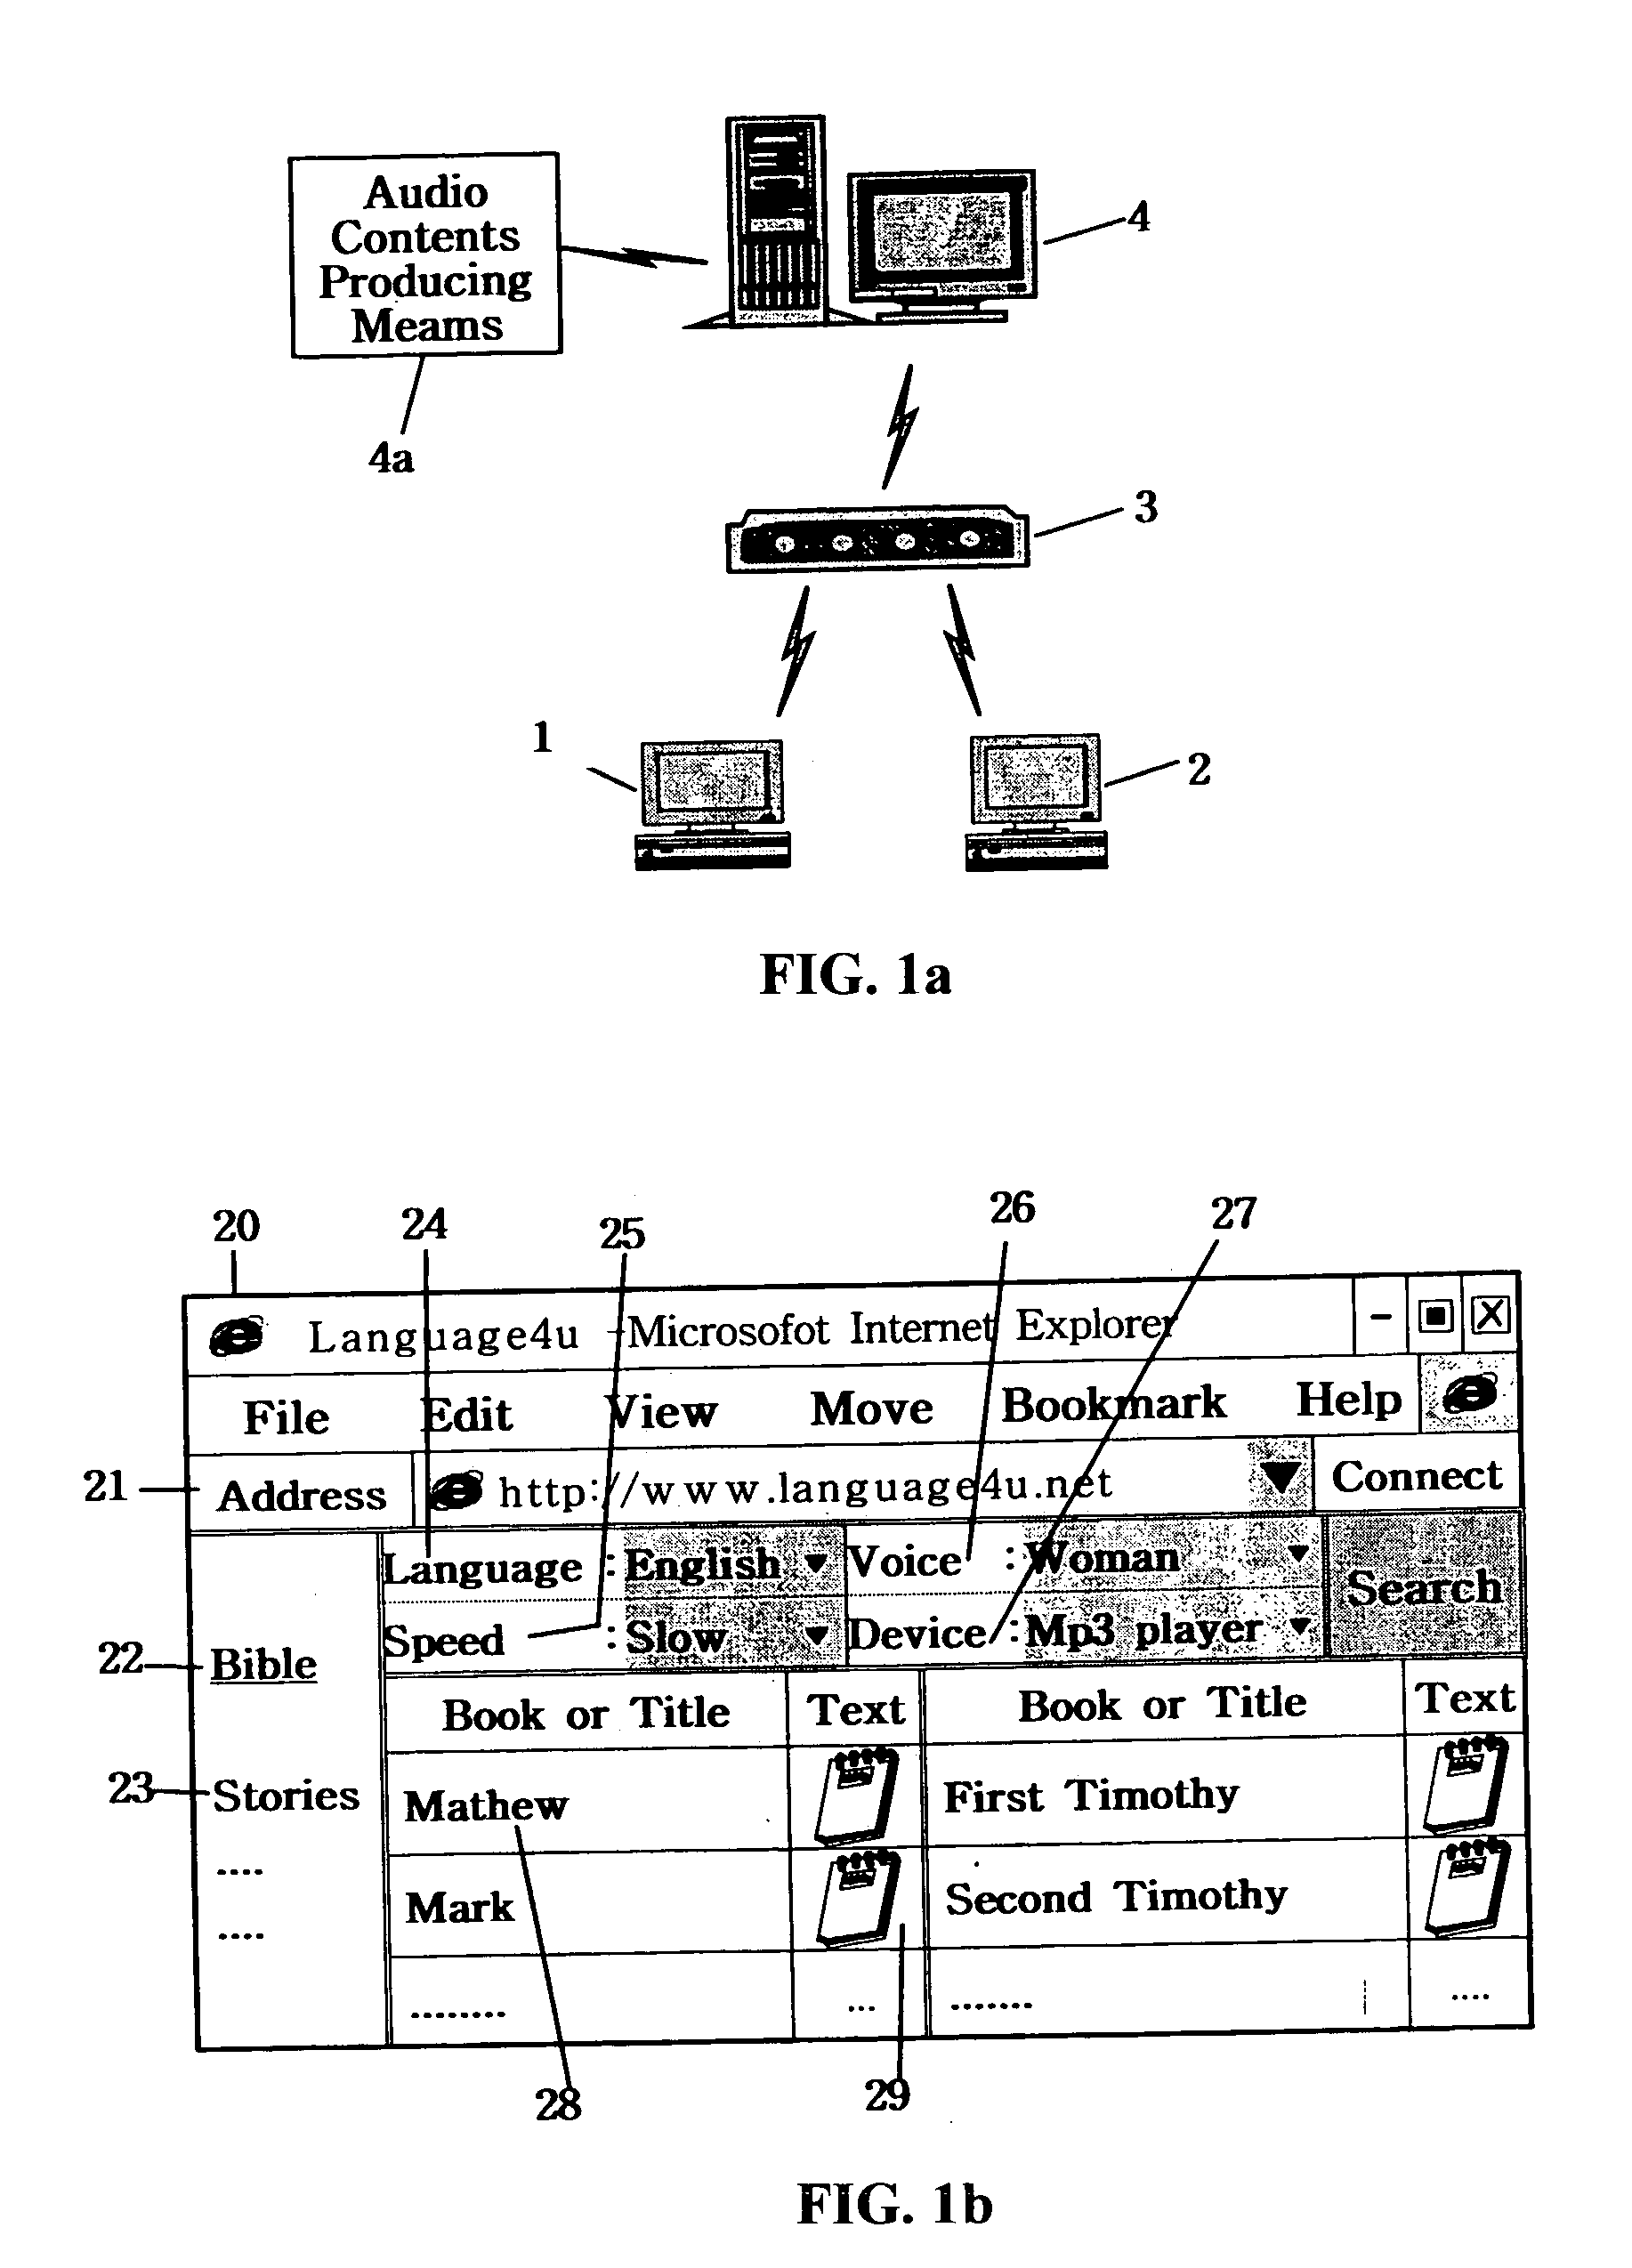 System and method for providing customized contents